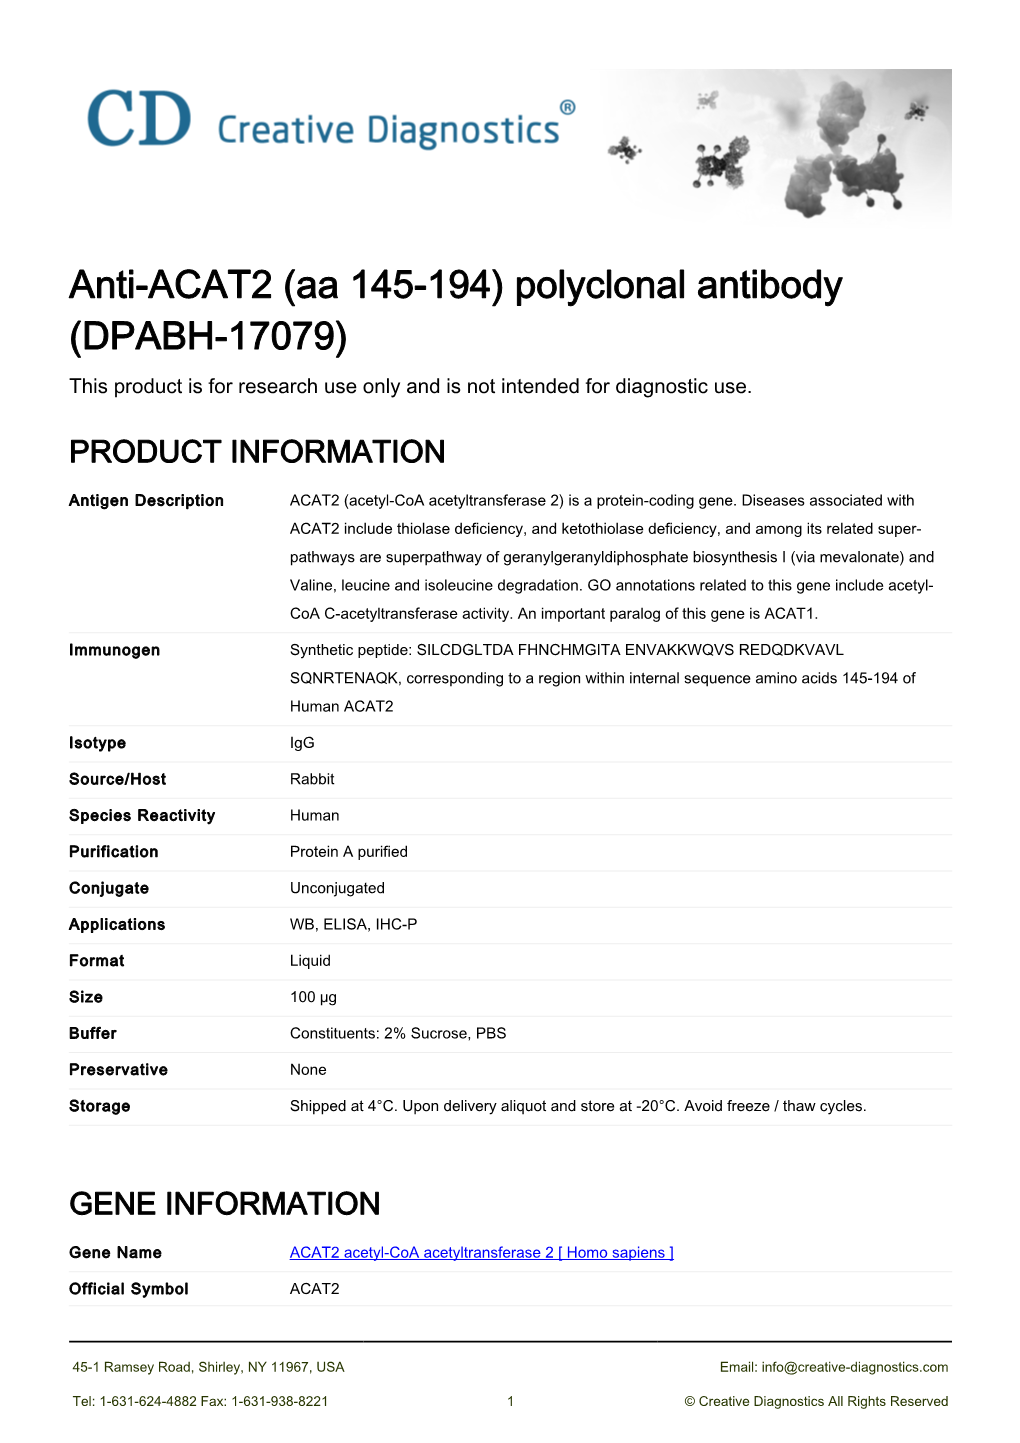 Anti-ACAT2 (Aa 145-194) Polyclonal Antibody (DPABH-17079) This Product Is for Research Use Only and Is Not Intended for Diagnostic Use